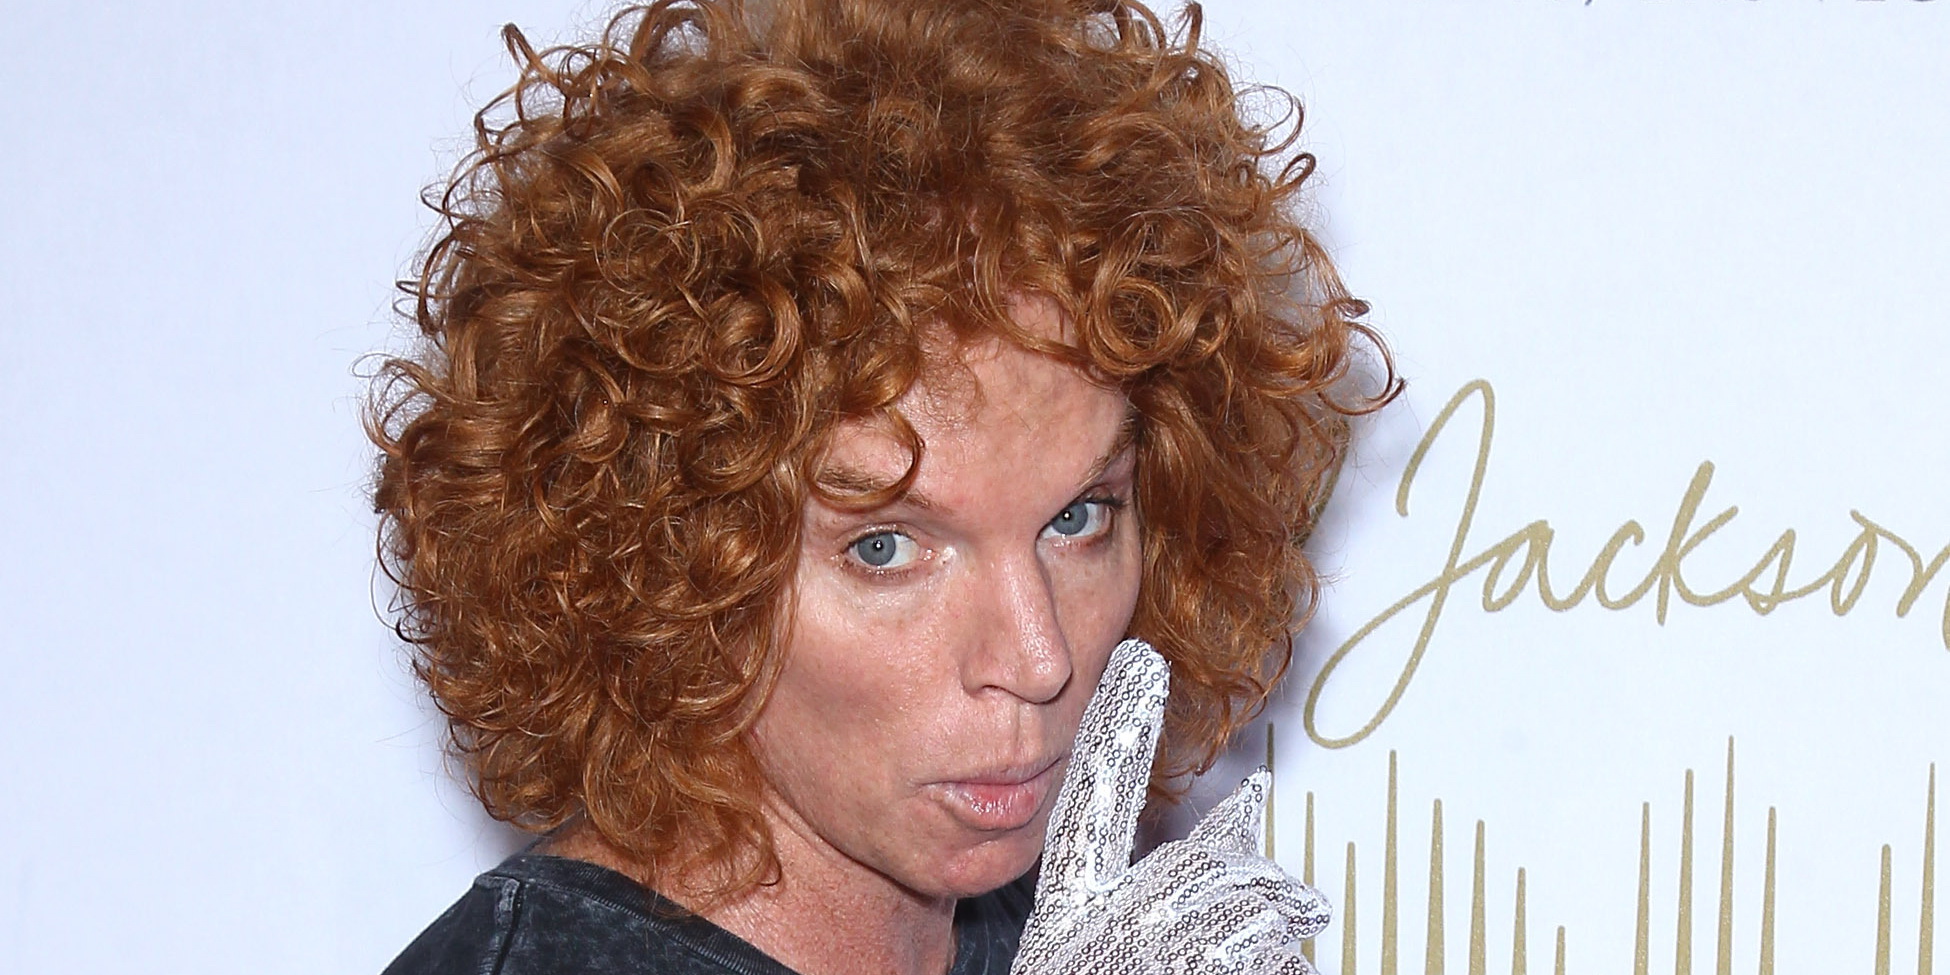 What are some interesting facts about carrot top?